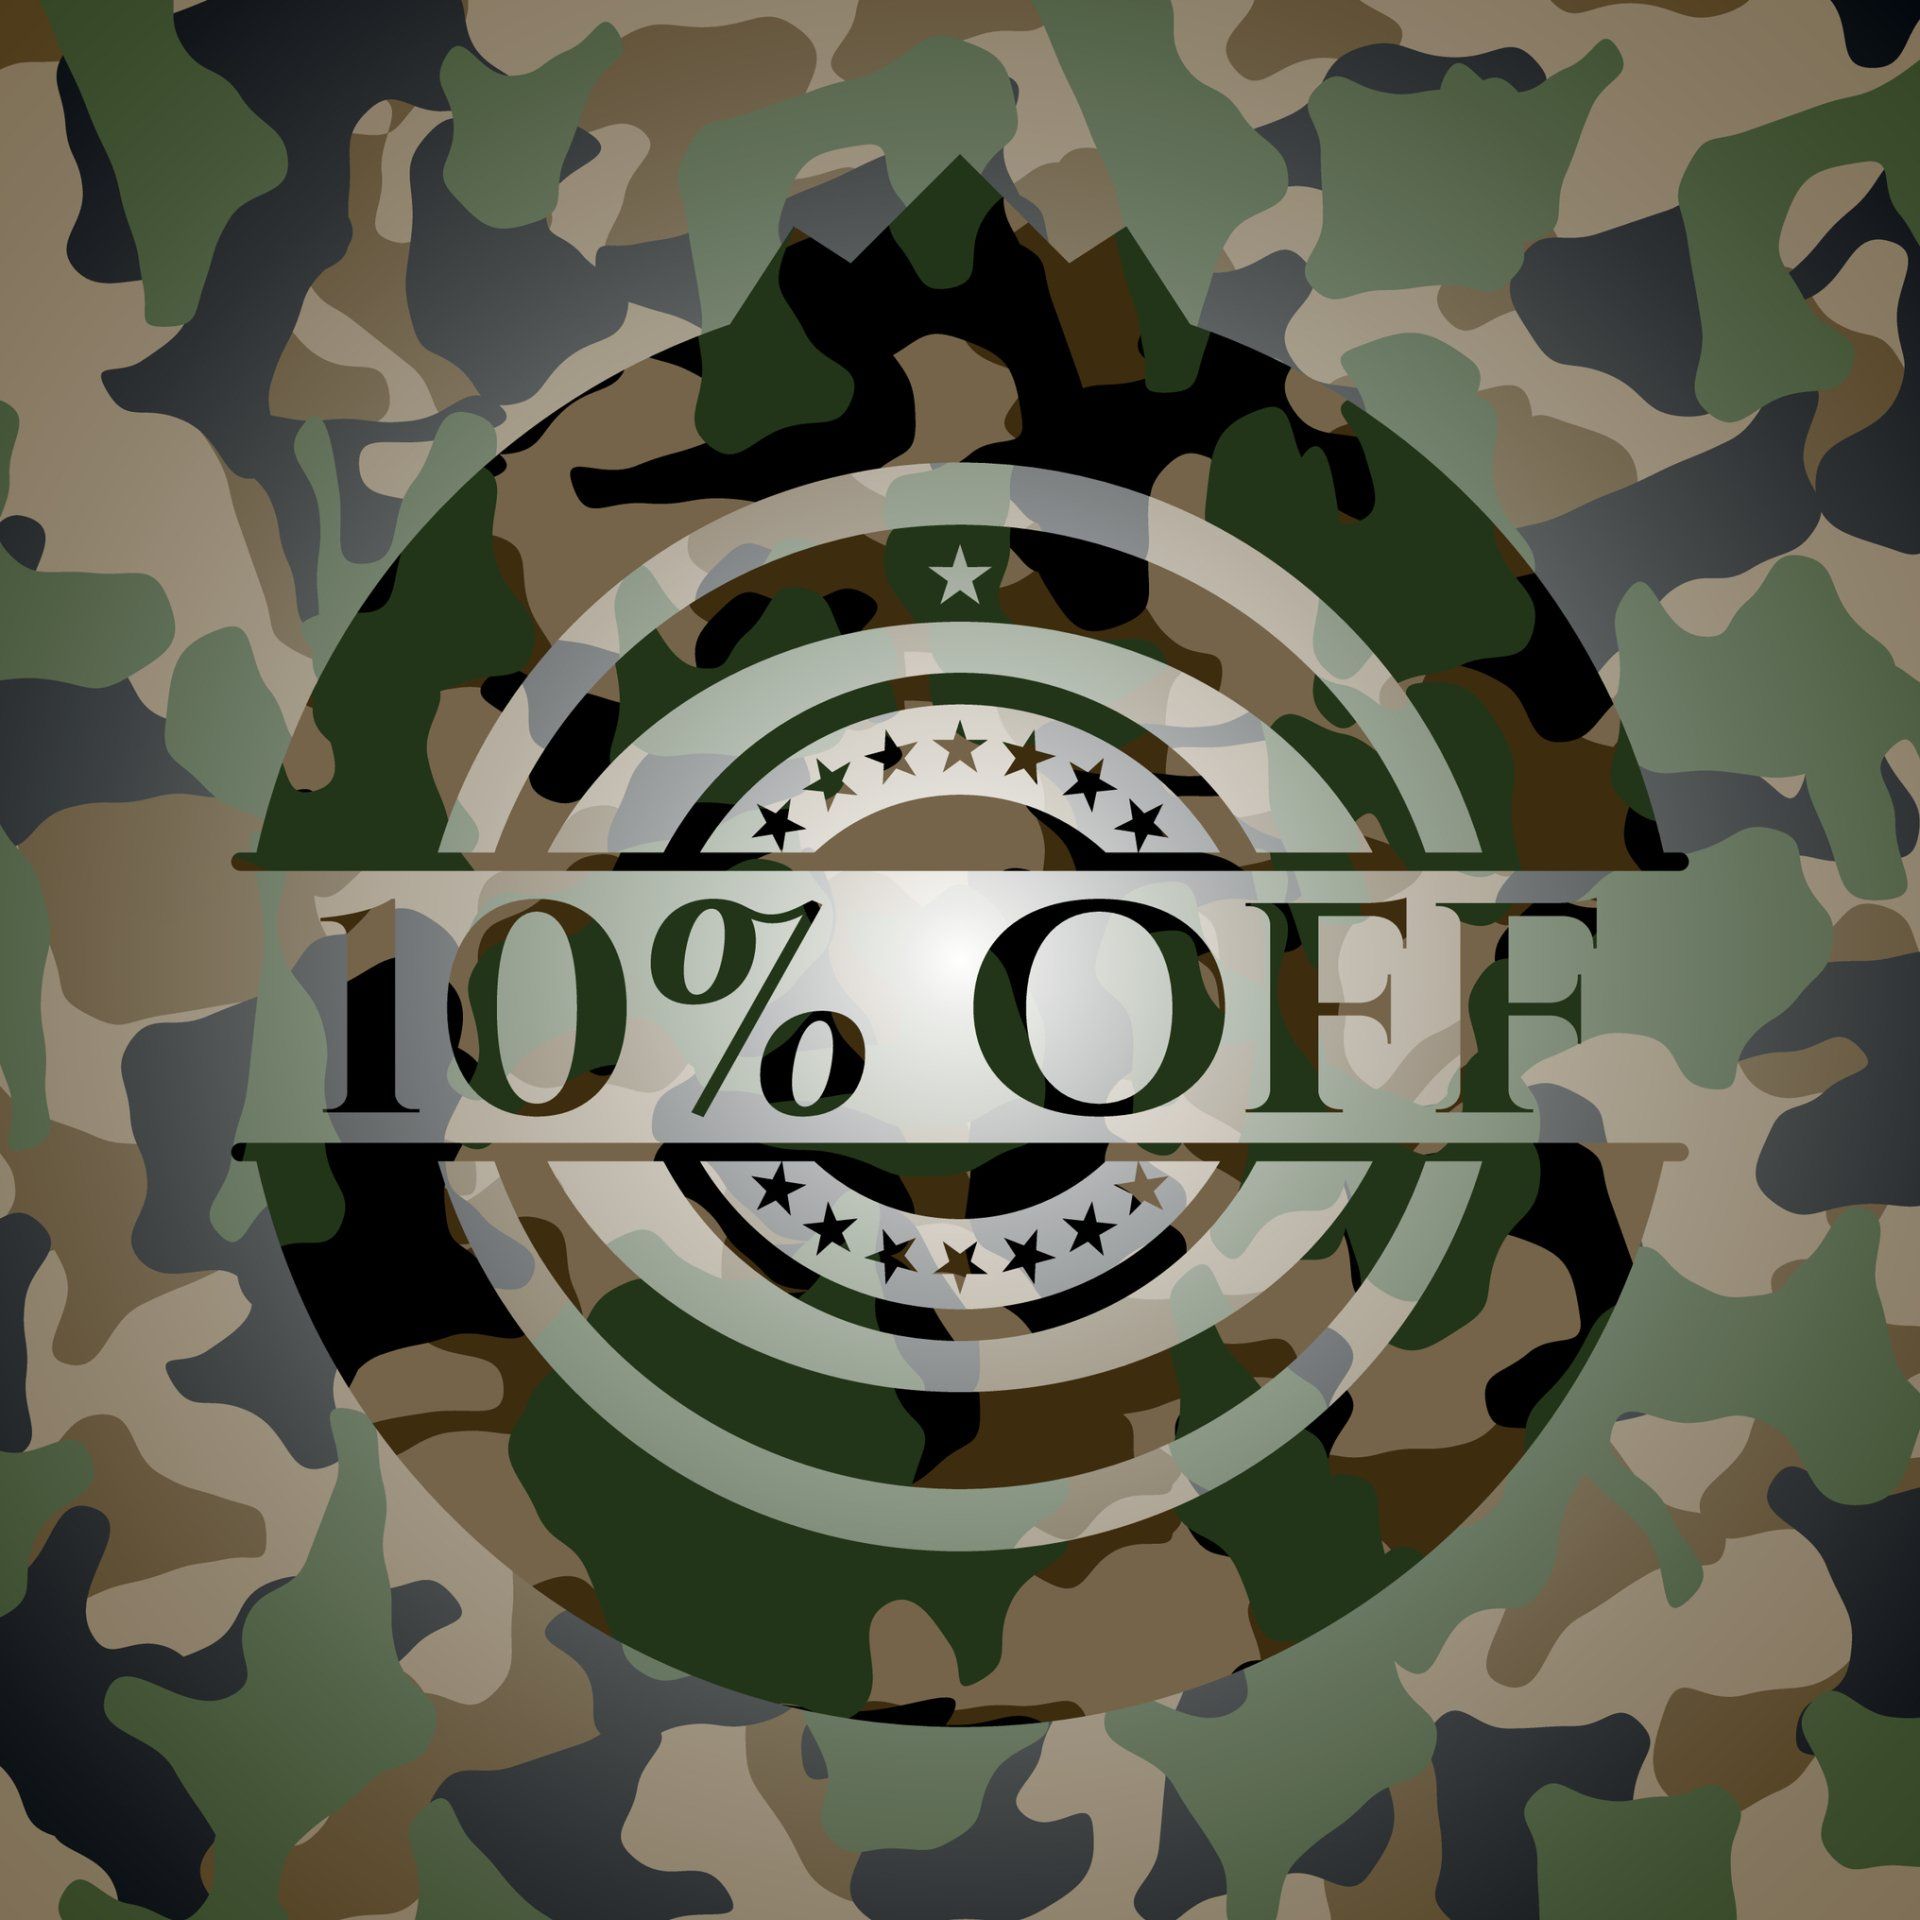 10% off military pest control discount Massachusetts and Rhode Island